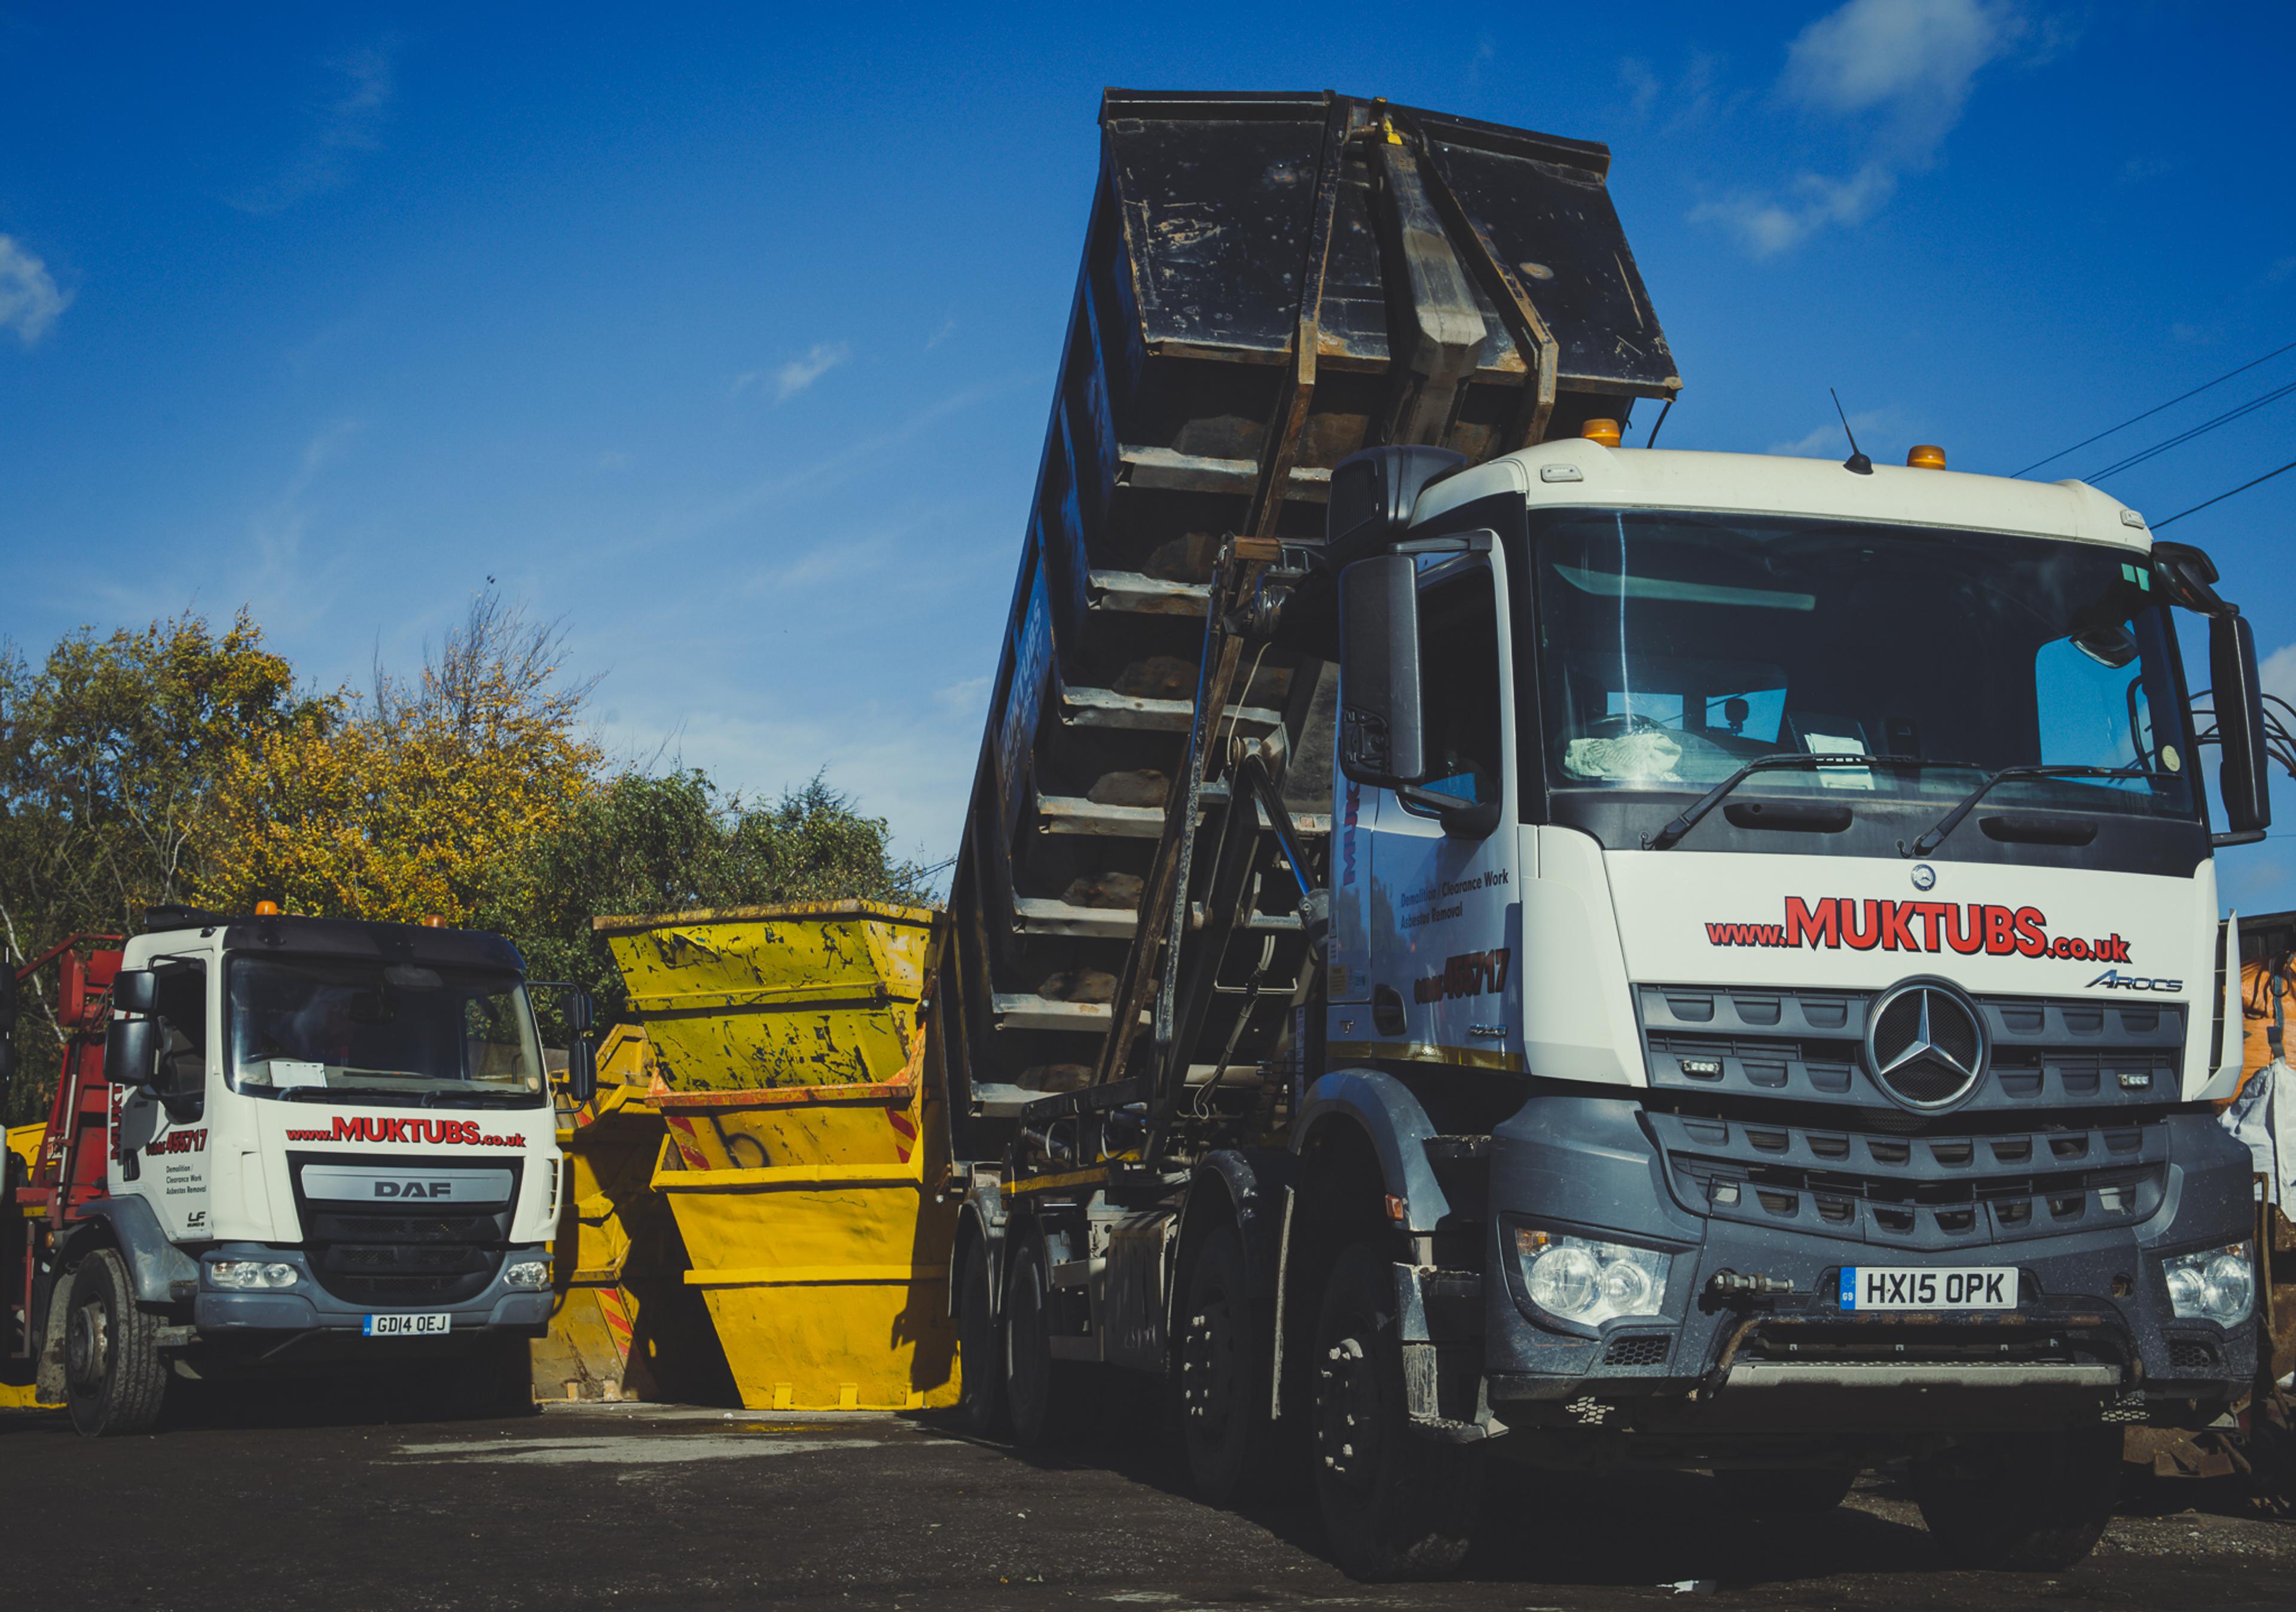 Roll on roll off skip hire